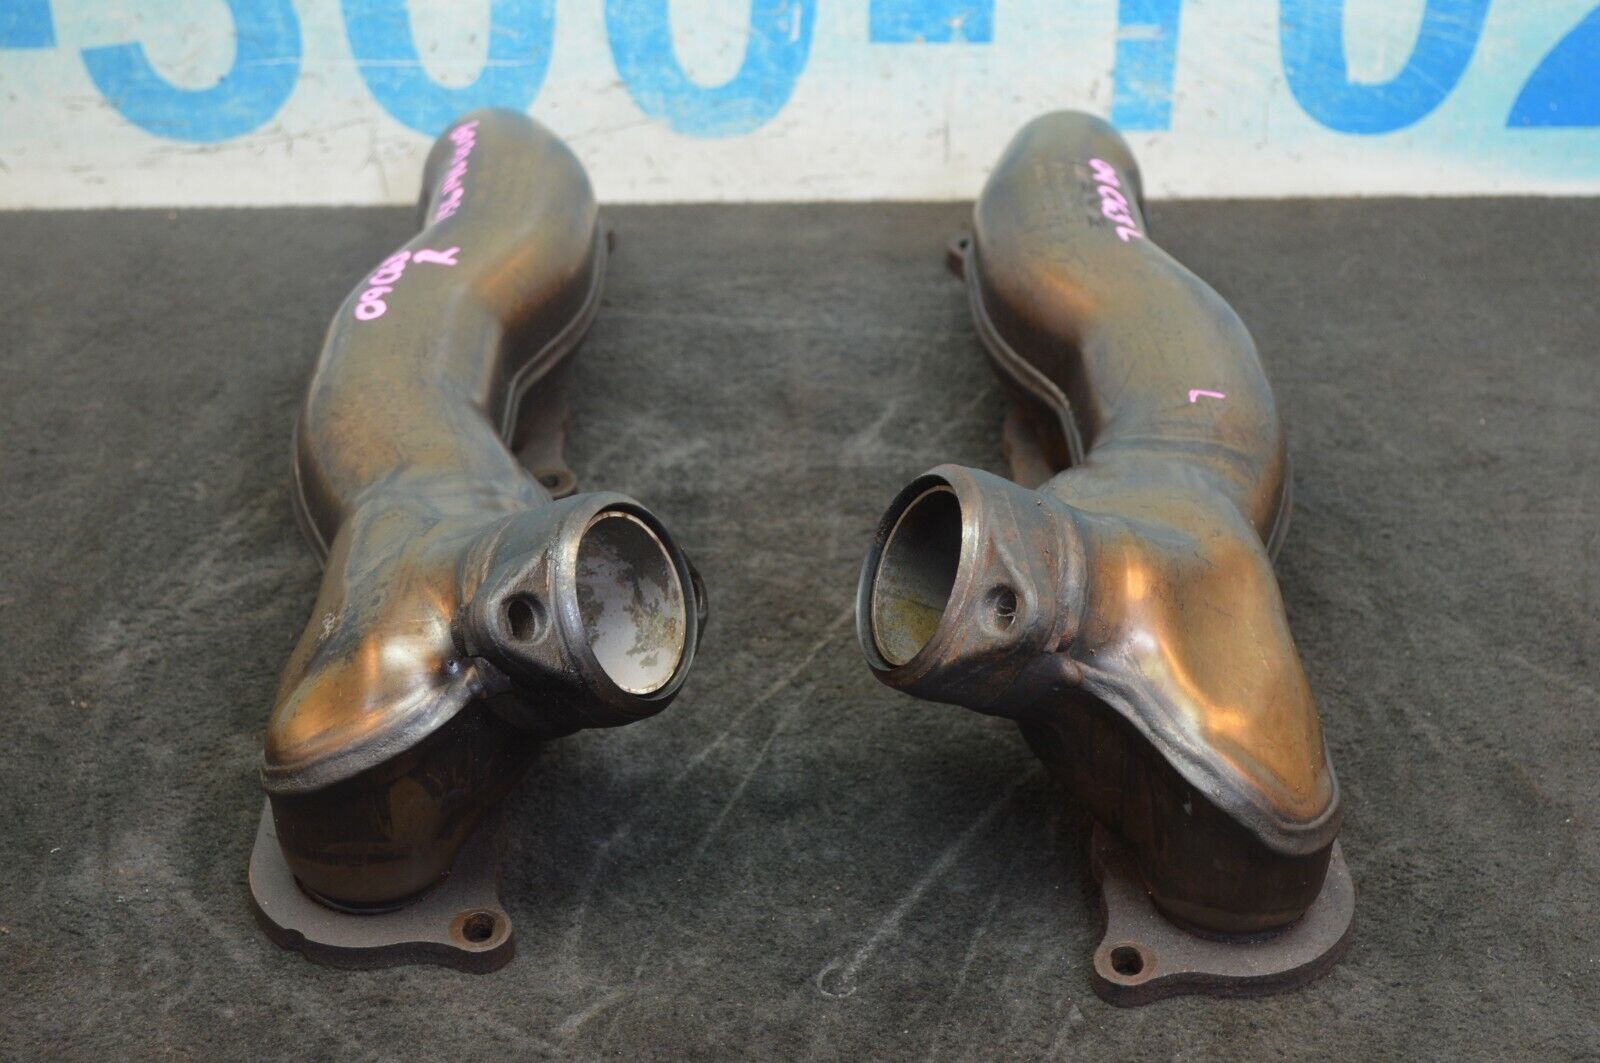 2009 W204 MERCEDES BENZ C63 AMG EXHAUST MANIFOLD HEADERS LEFT & RIGHT PAIR